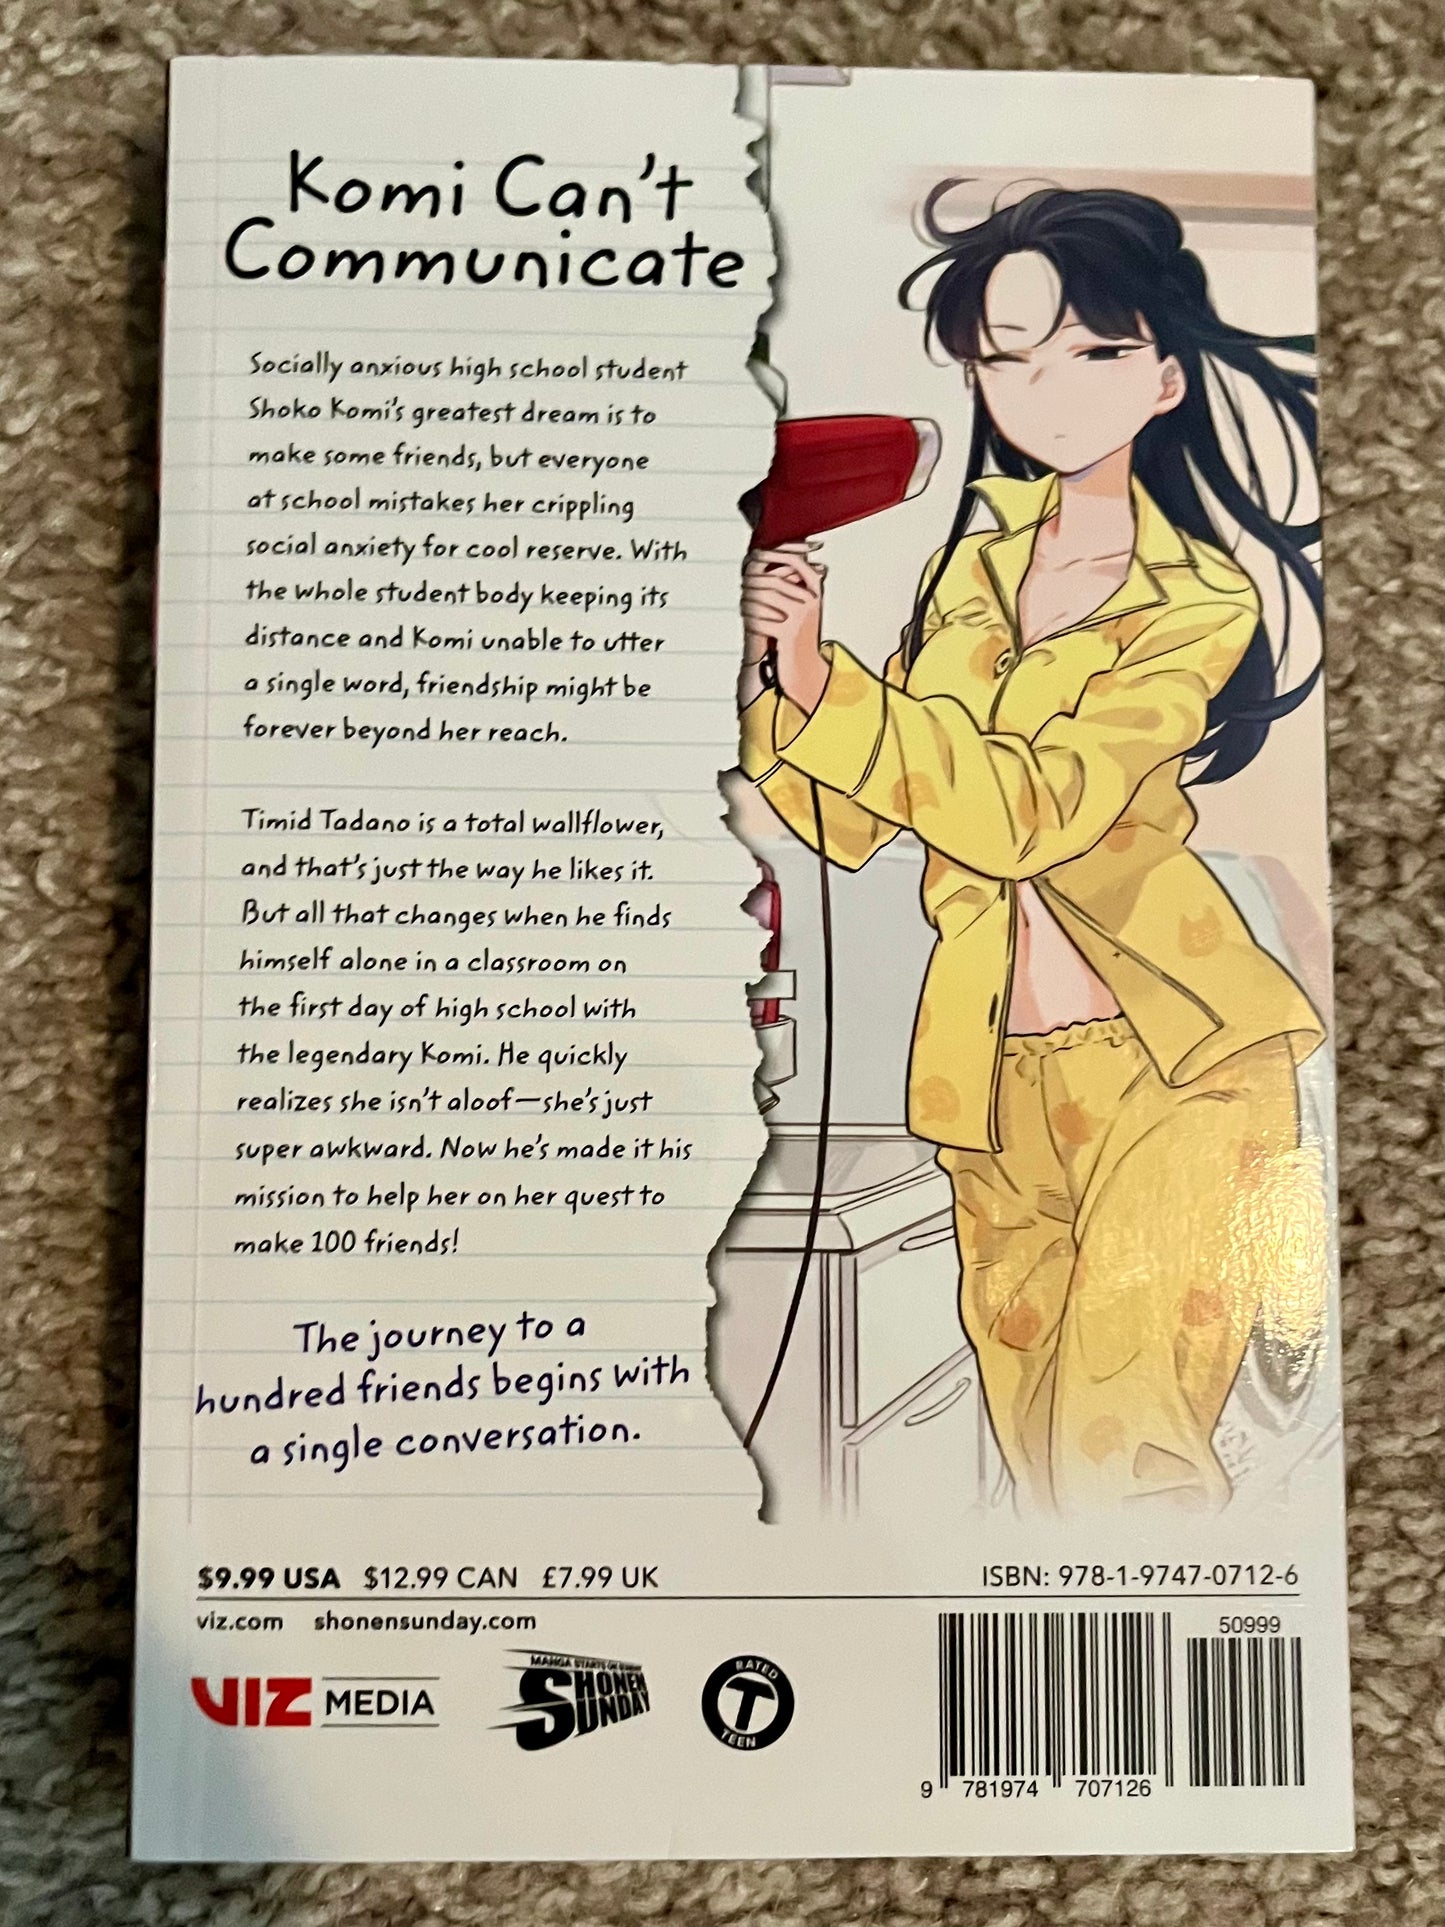 Komi Can't Communicate, Vol 1 BRAND NEW! - Tales from the Tangle